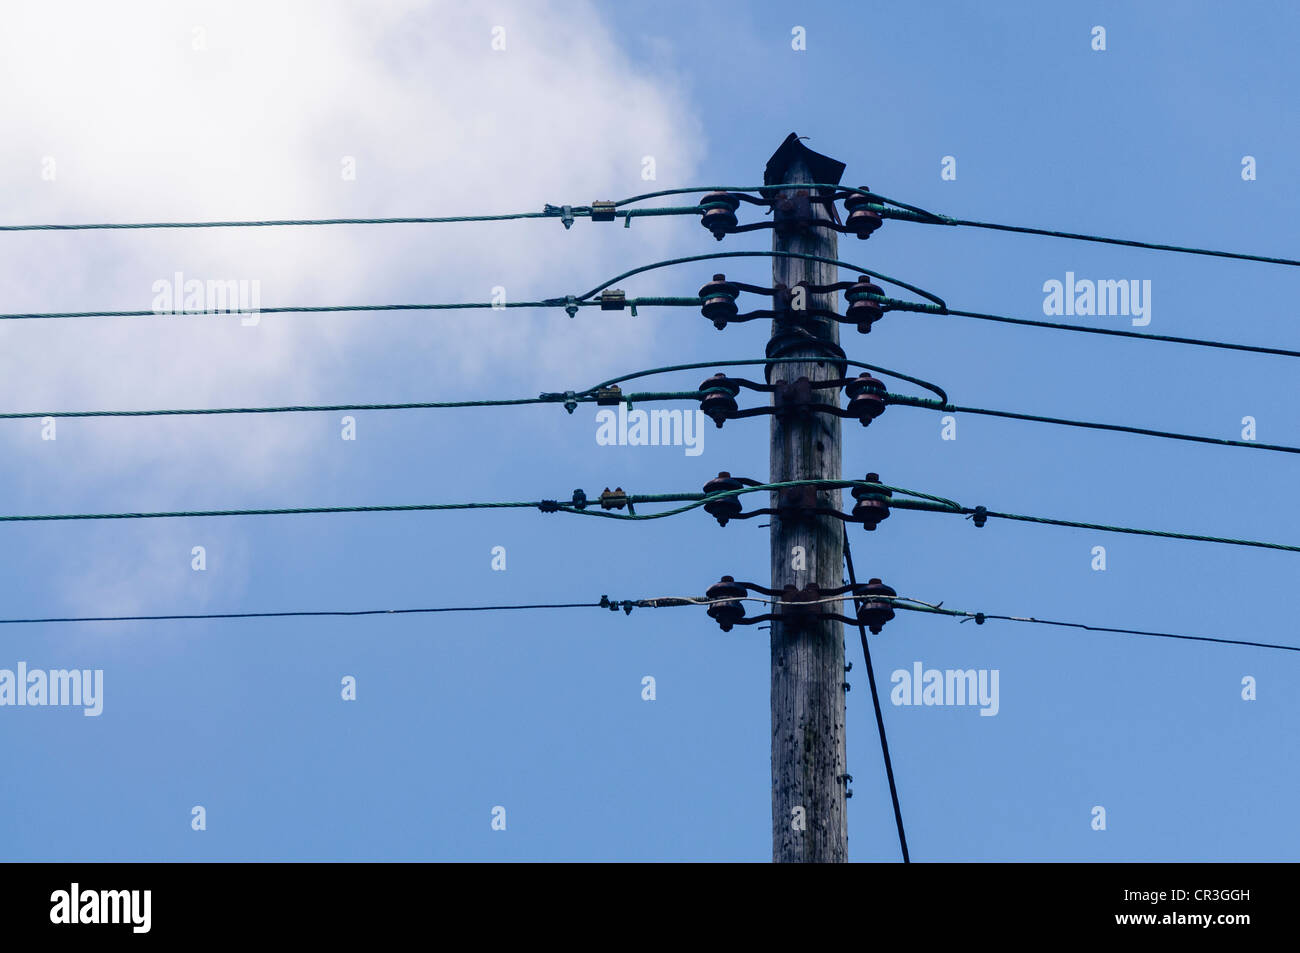 Overhead electricity power lines on a wooden pole Stock Photo